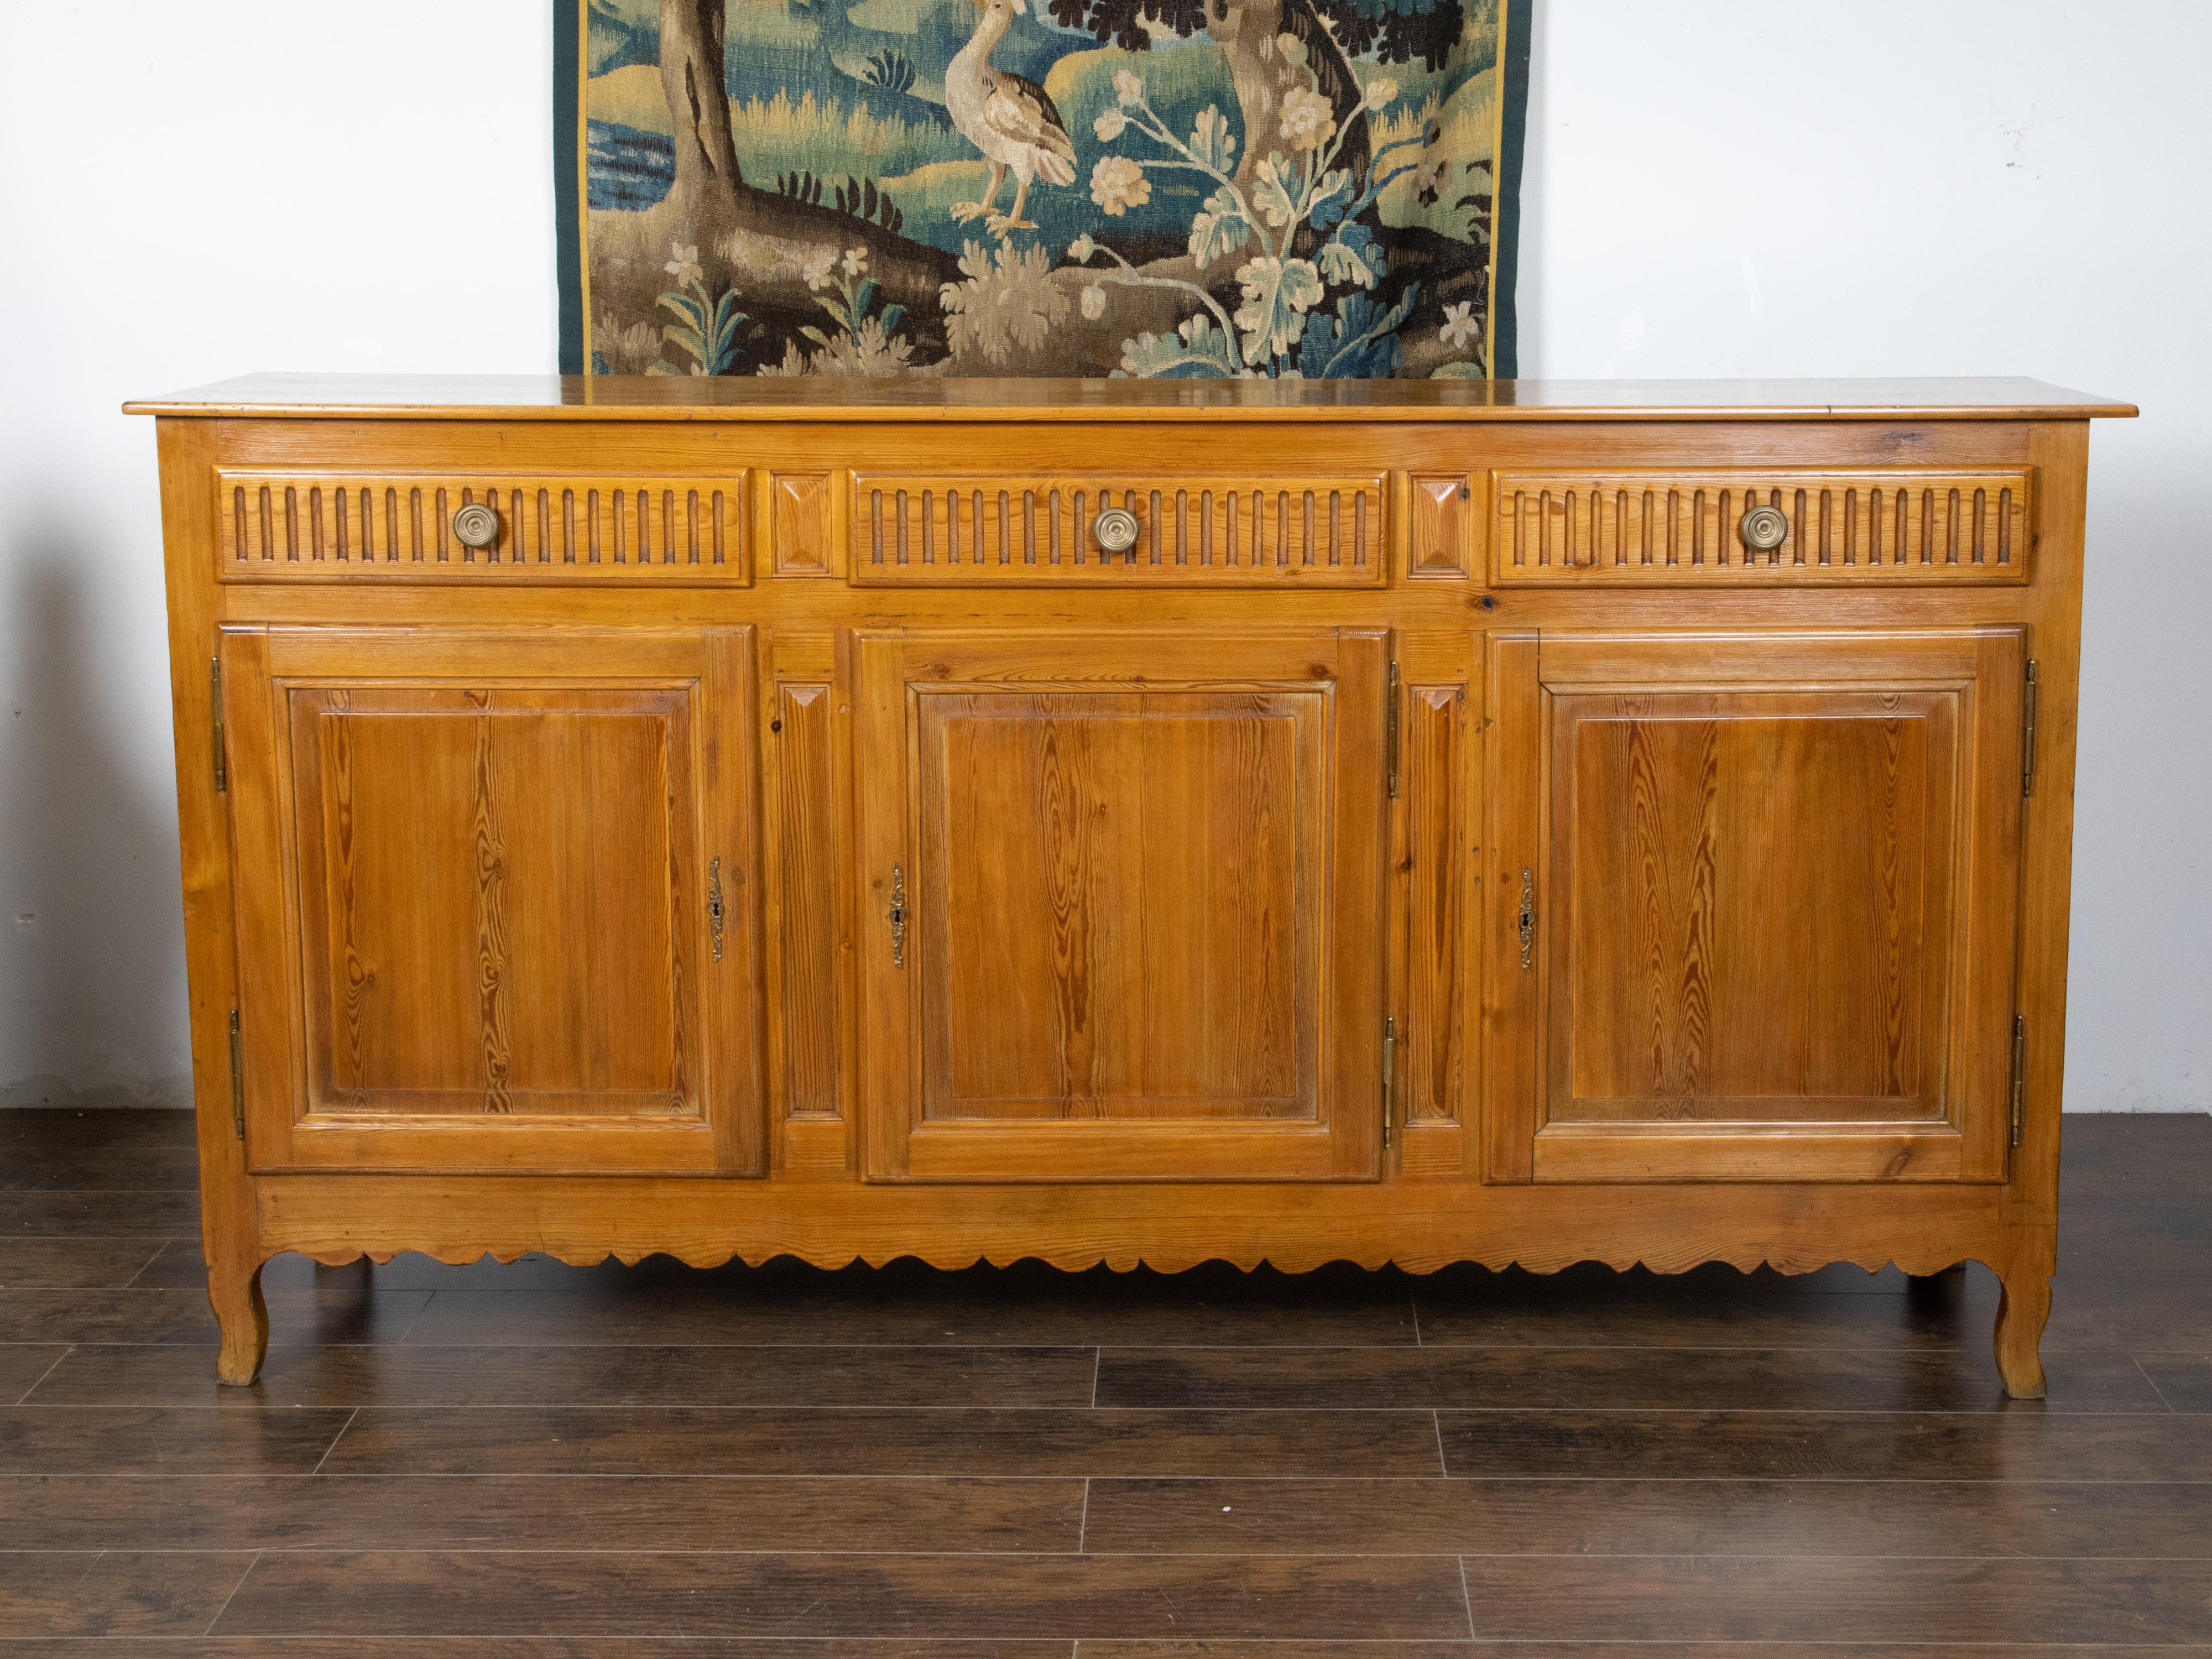 A French Transition style pine buffet from the 19th century, with three fluted drawers over three doors, carved apron and cabriole legs. Created in France during the 19th century, this pine buffet showcases the characteristics of the Transition